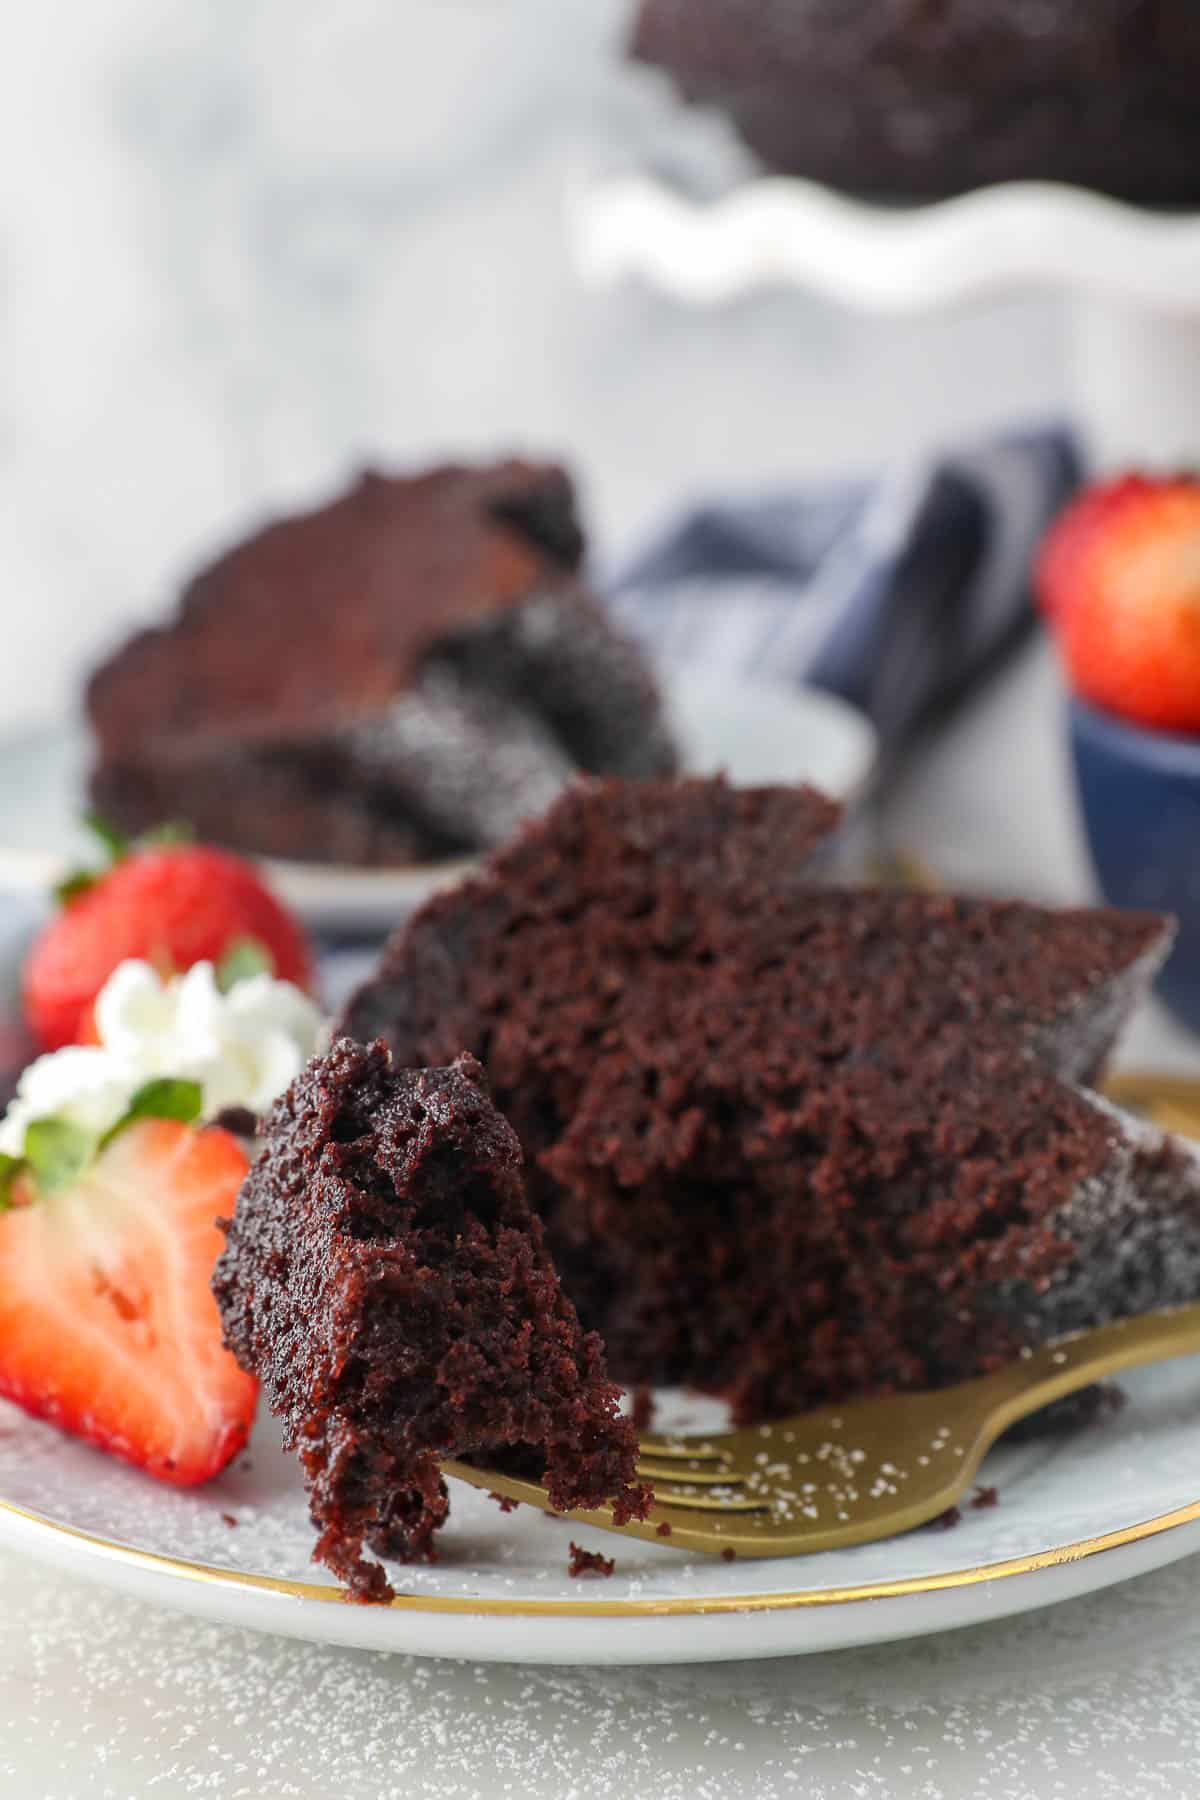 A forkful of chocolate rum cake next to a slice on a plate with strawberries.